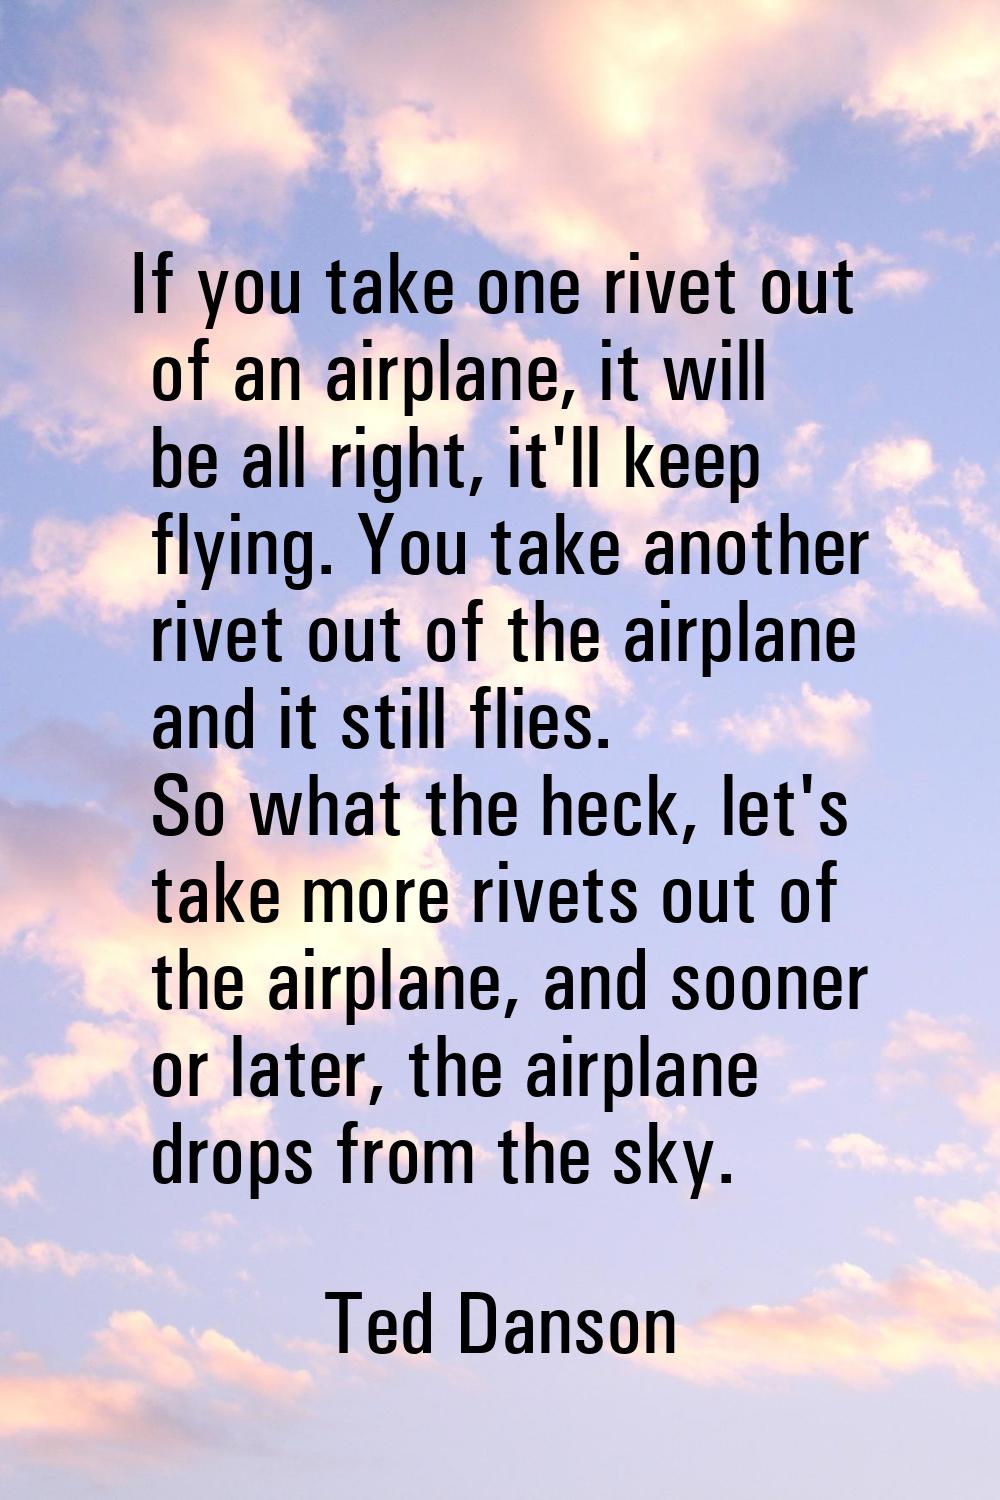 If you take one rivet out of an airplane, it will be all right, it'll keep flying. You take another